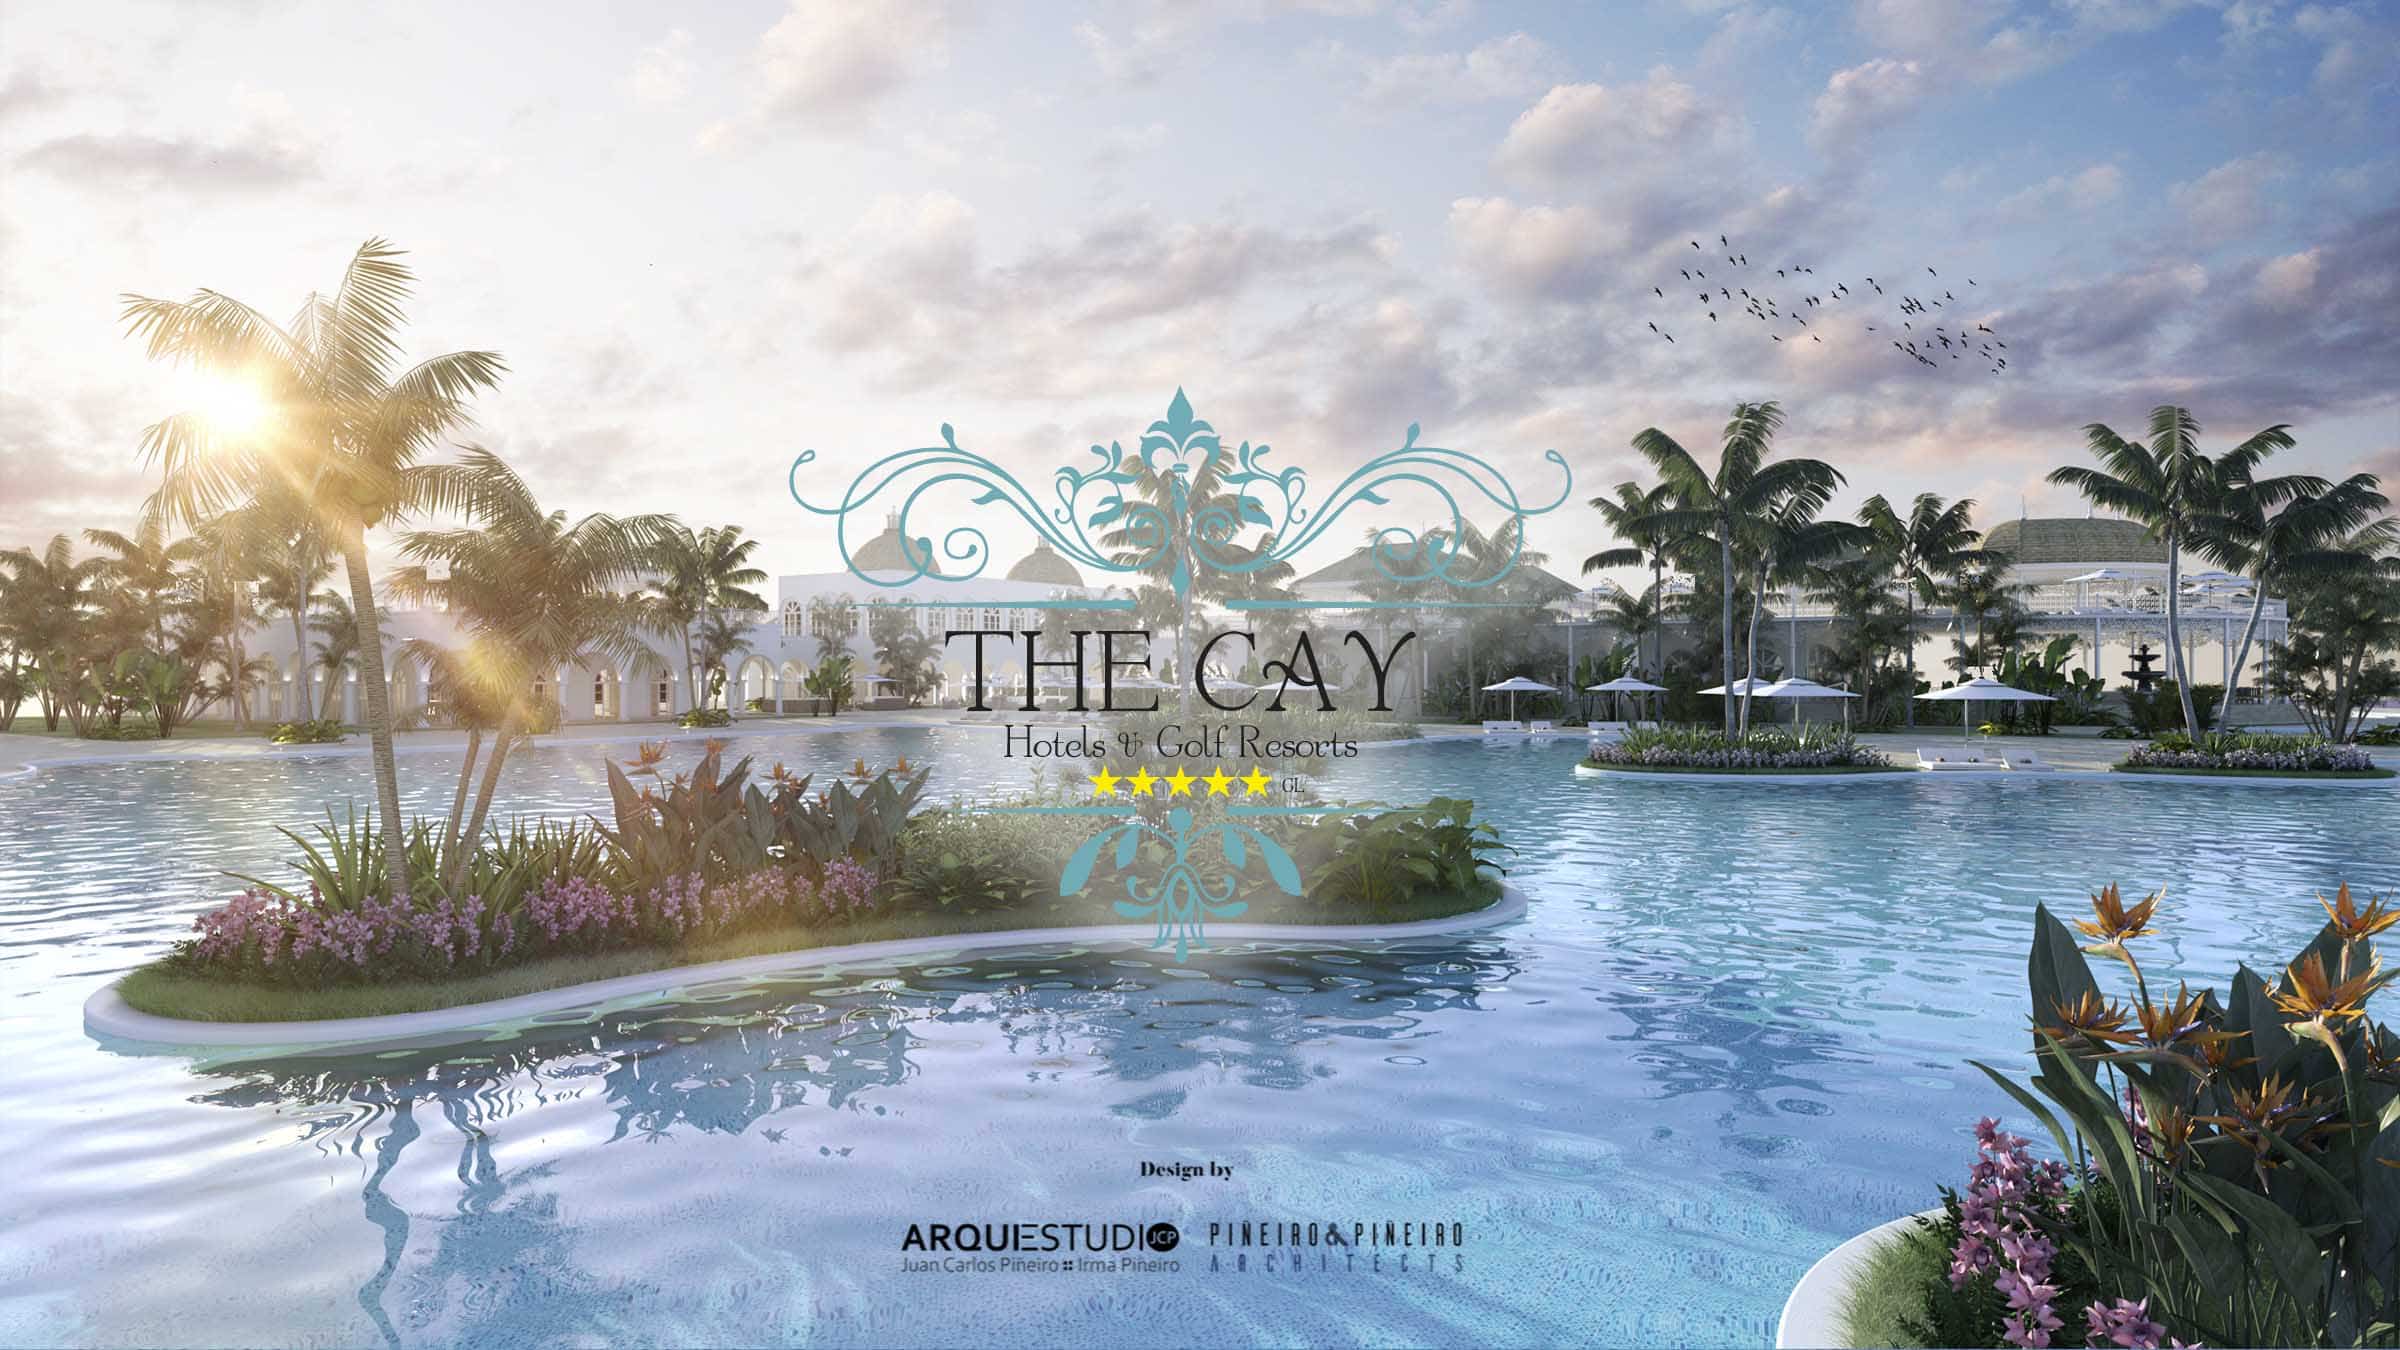 The Cay Hotels & Golf Resort - Dominican Republic Resort with 2 hotels 5 Stars, 1 condominium buildings, 1 golf course and golf villas.